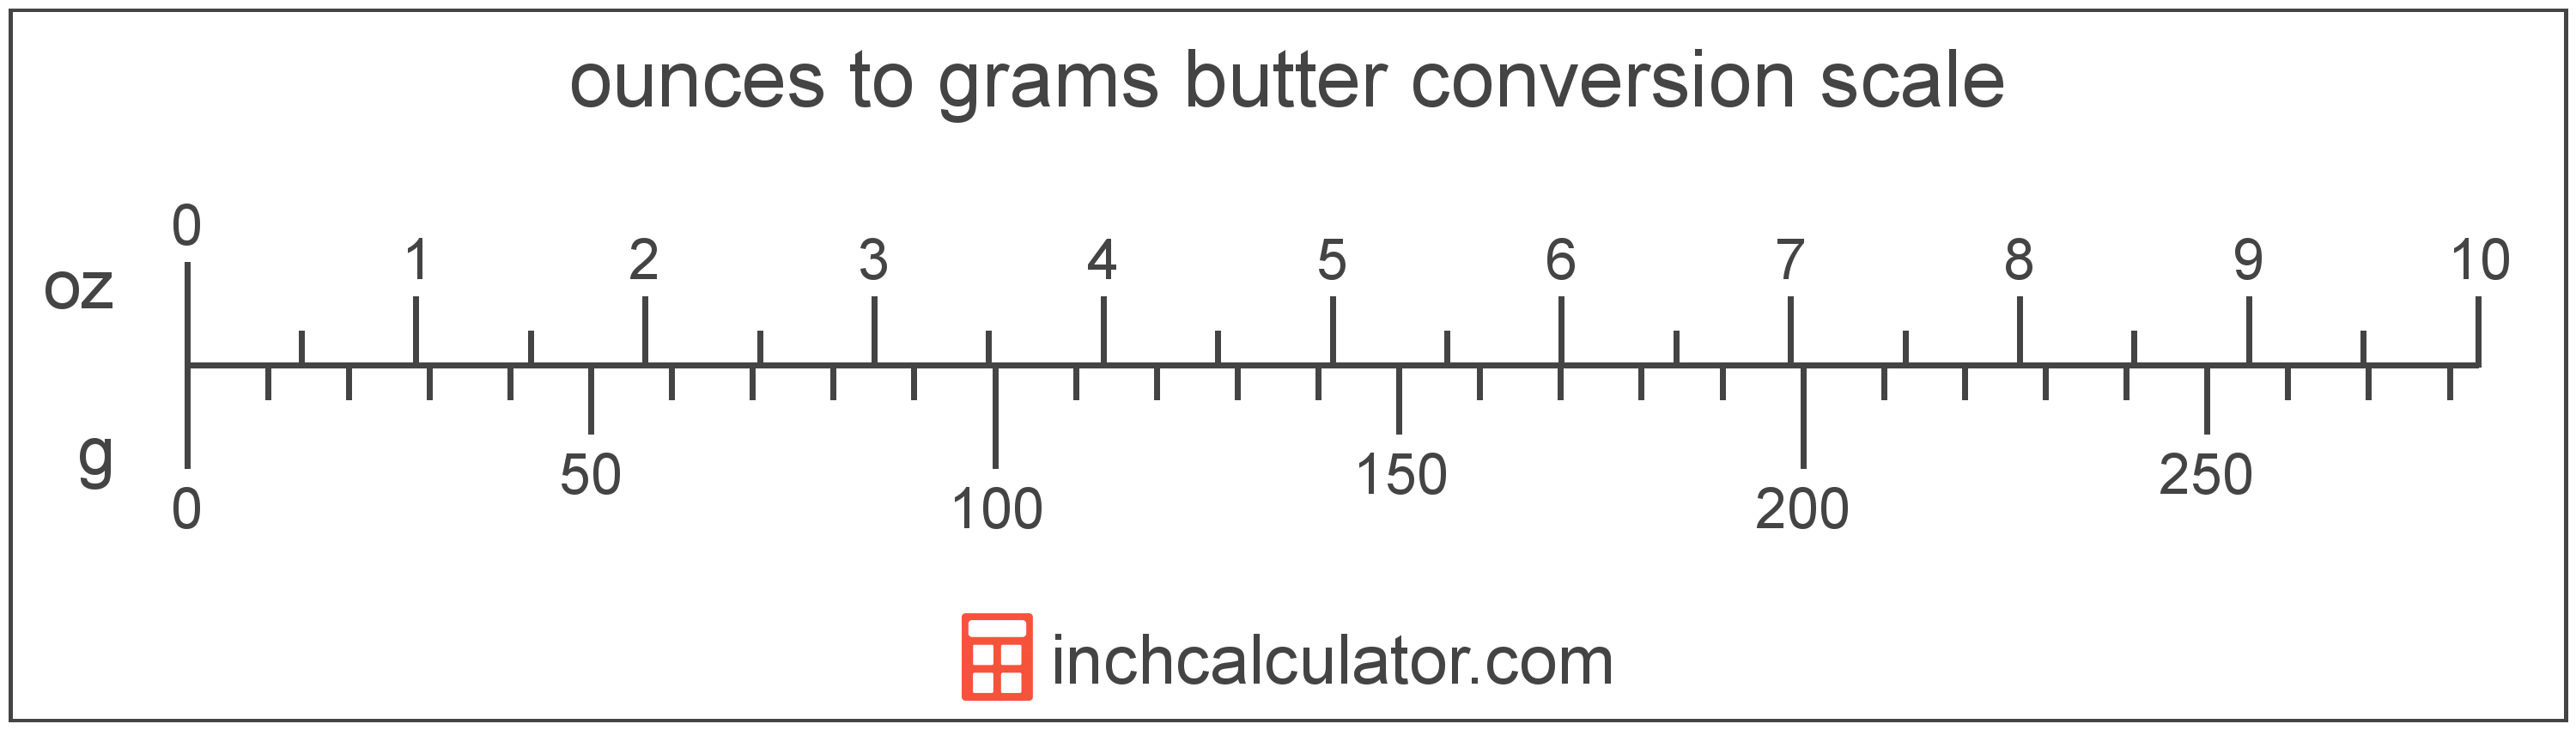 Grams To Ounces Conversion Chart And Ounces To Grams